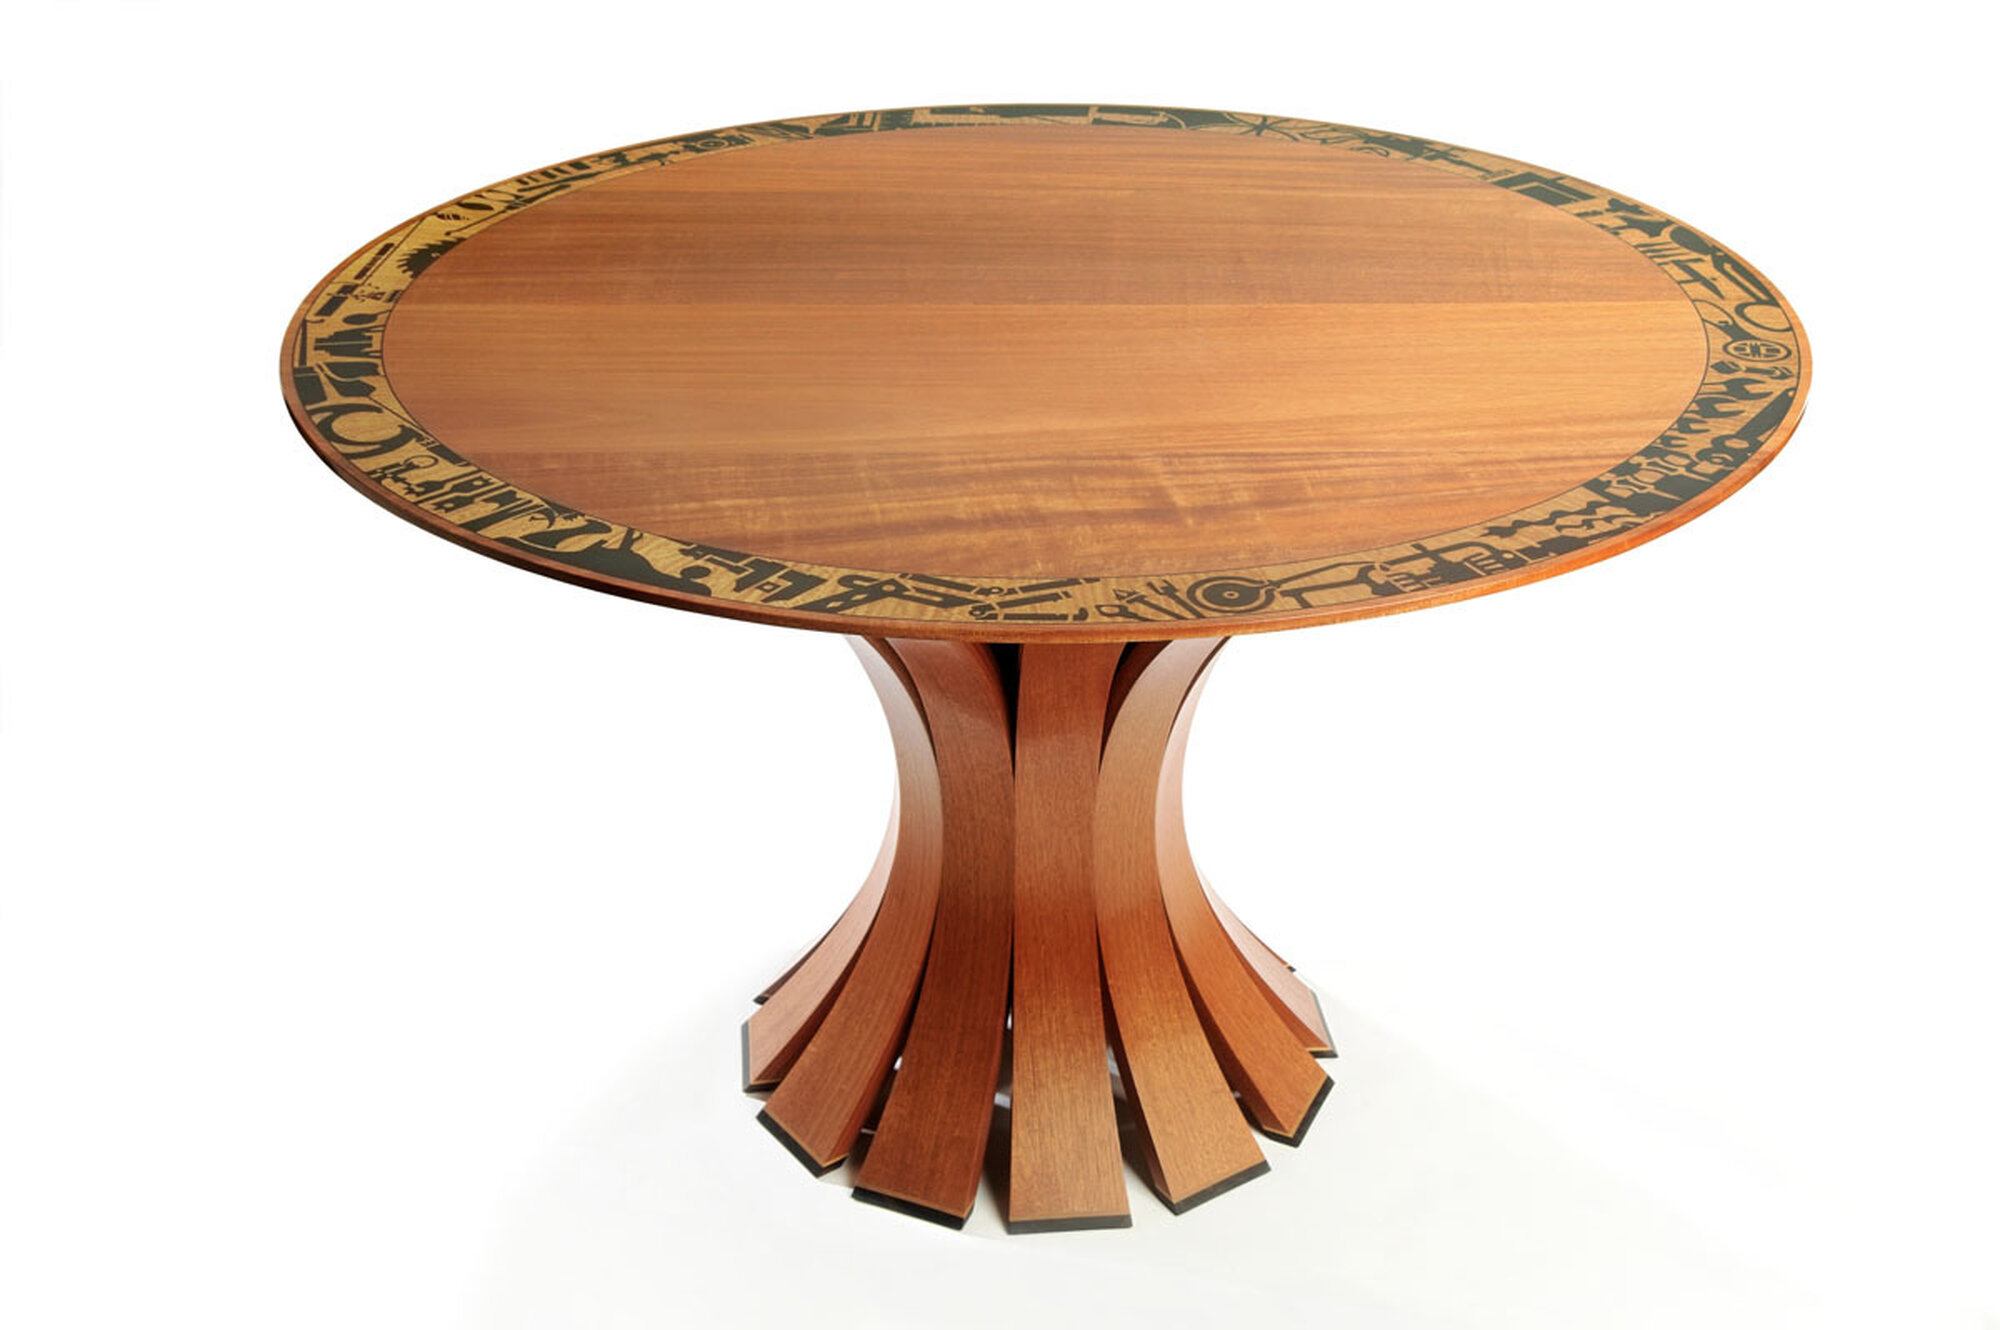 Lotus Base Table with Antique Tool Collection Inlay